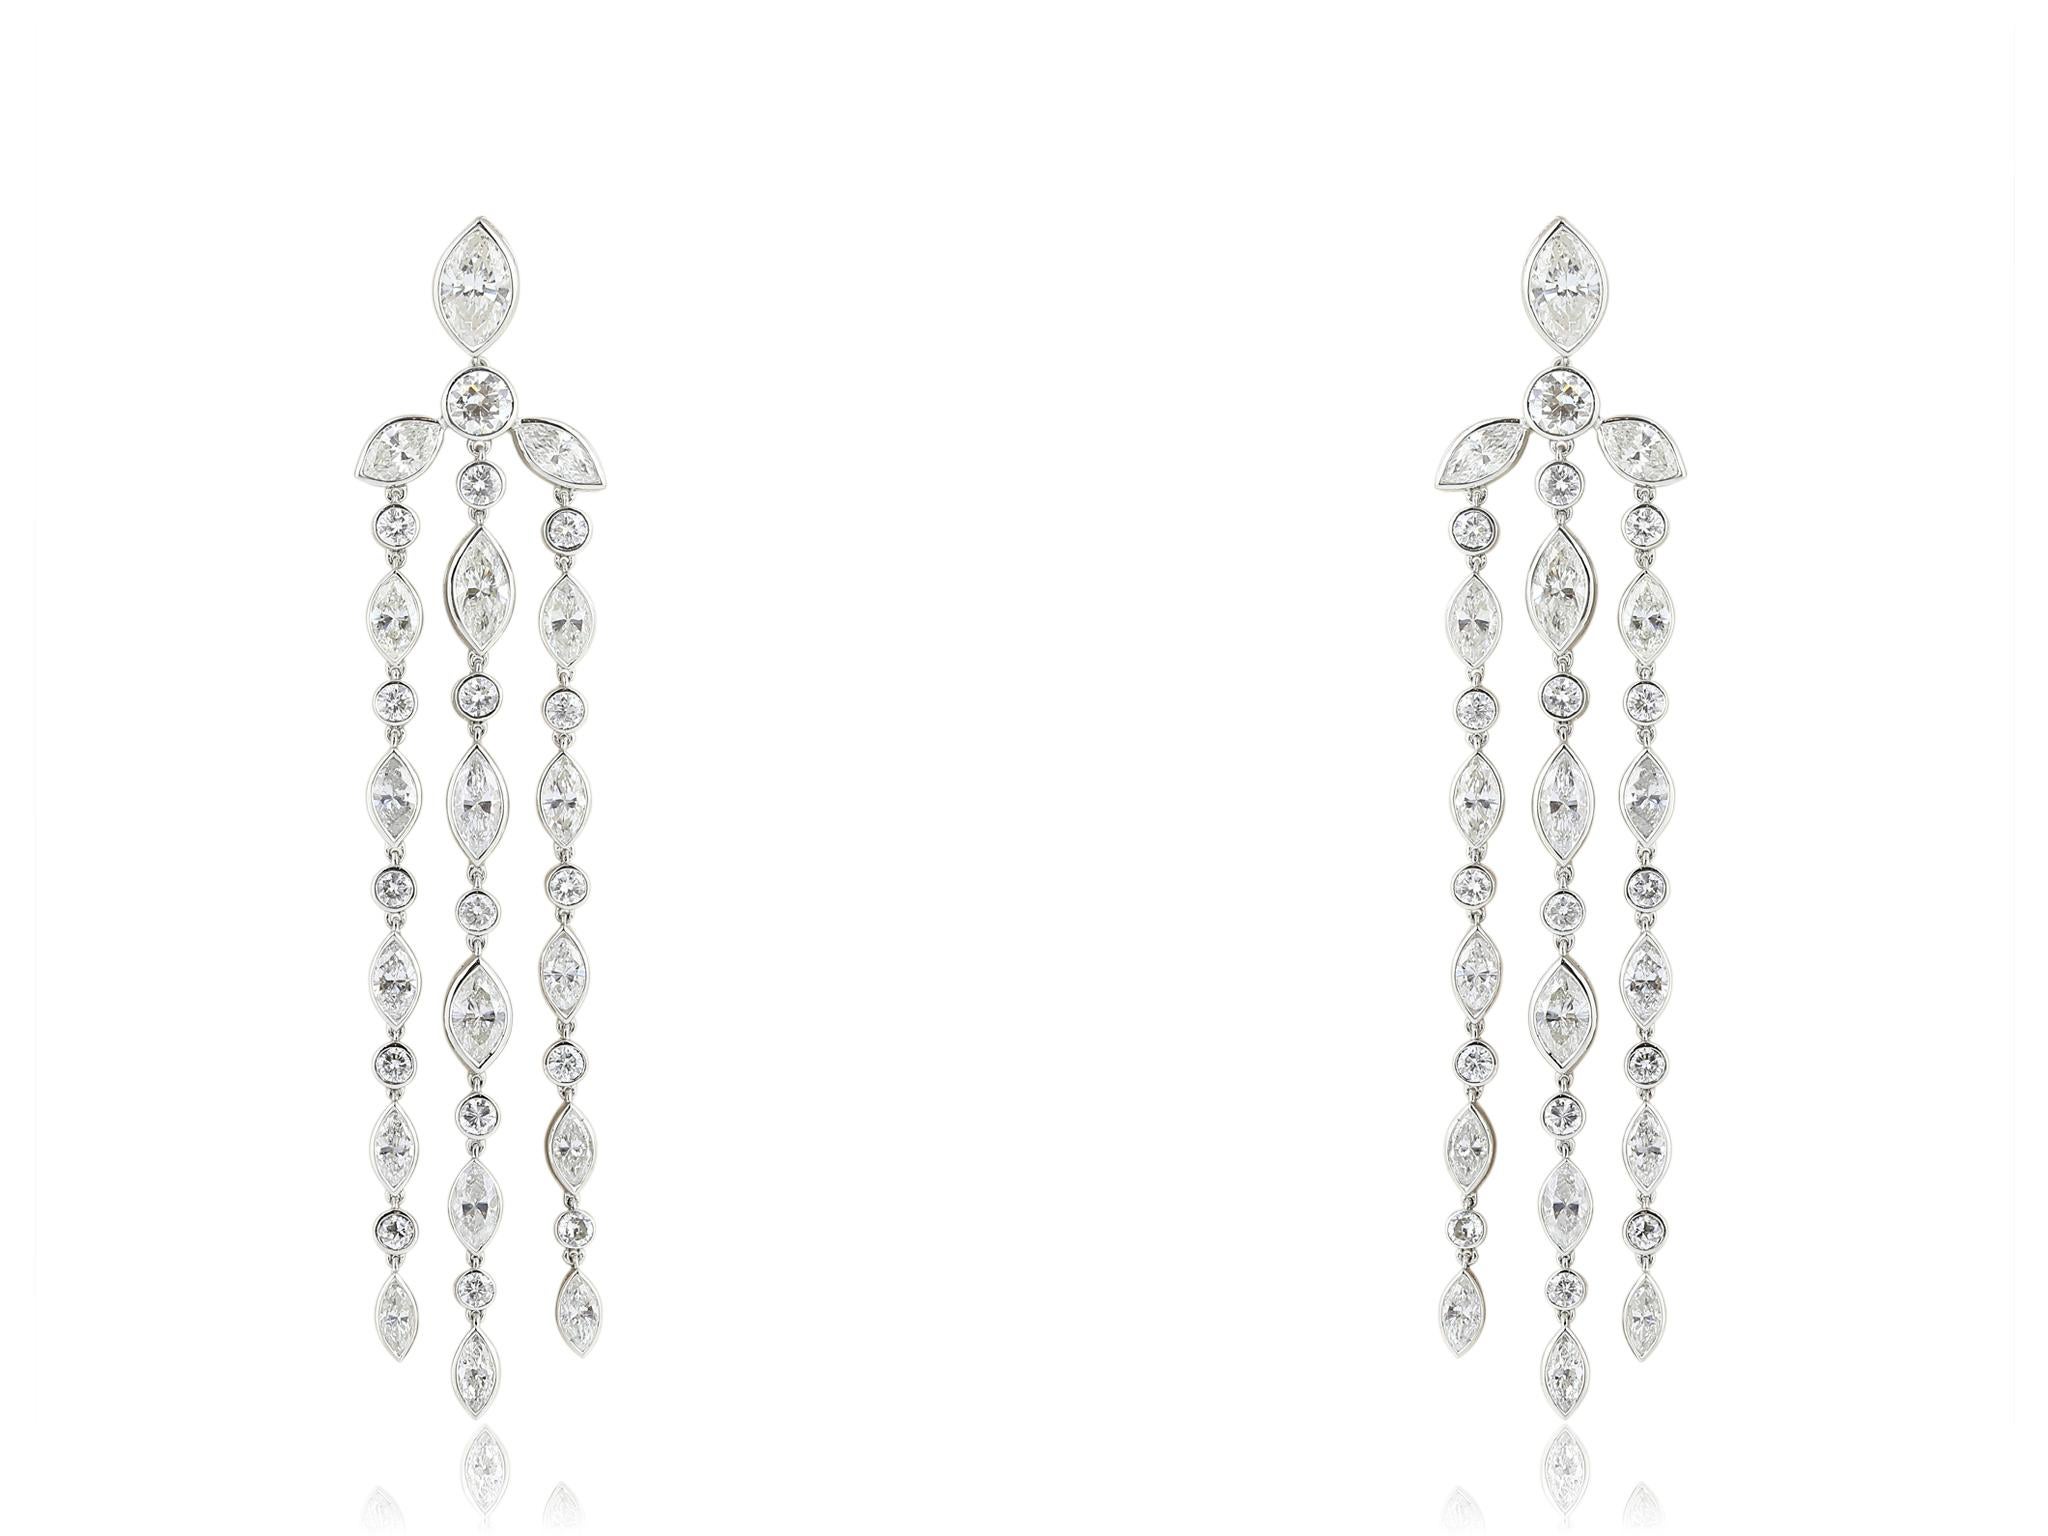 Stunning Art Deco platinum drop diamond earrings consisting of bezel set marquis and round brilliant cut diamonds with a total approximate weight of 8.25 carats with a color and clarity of F-G VS1-VS2 respectively.